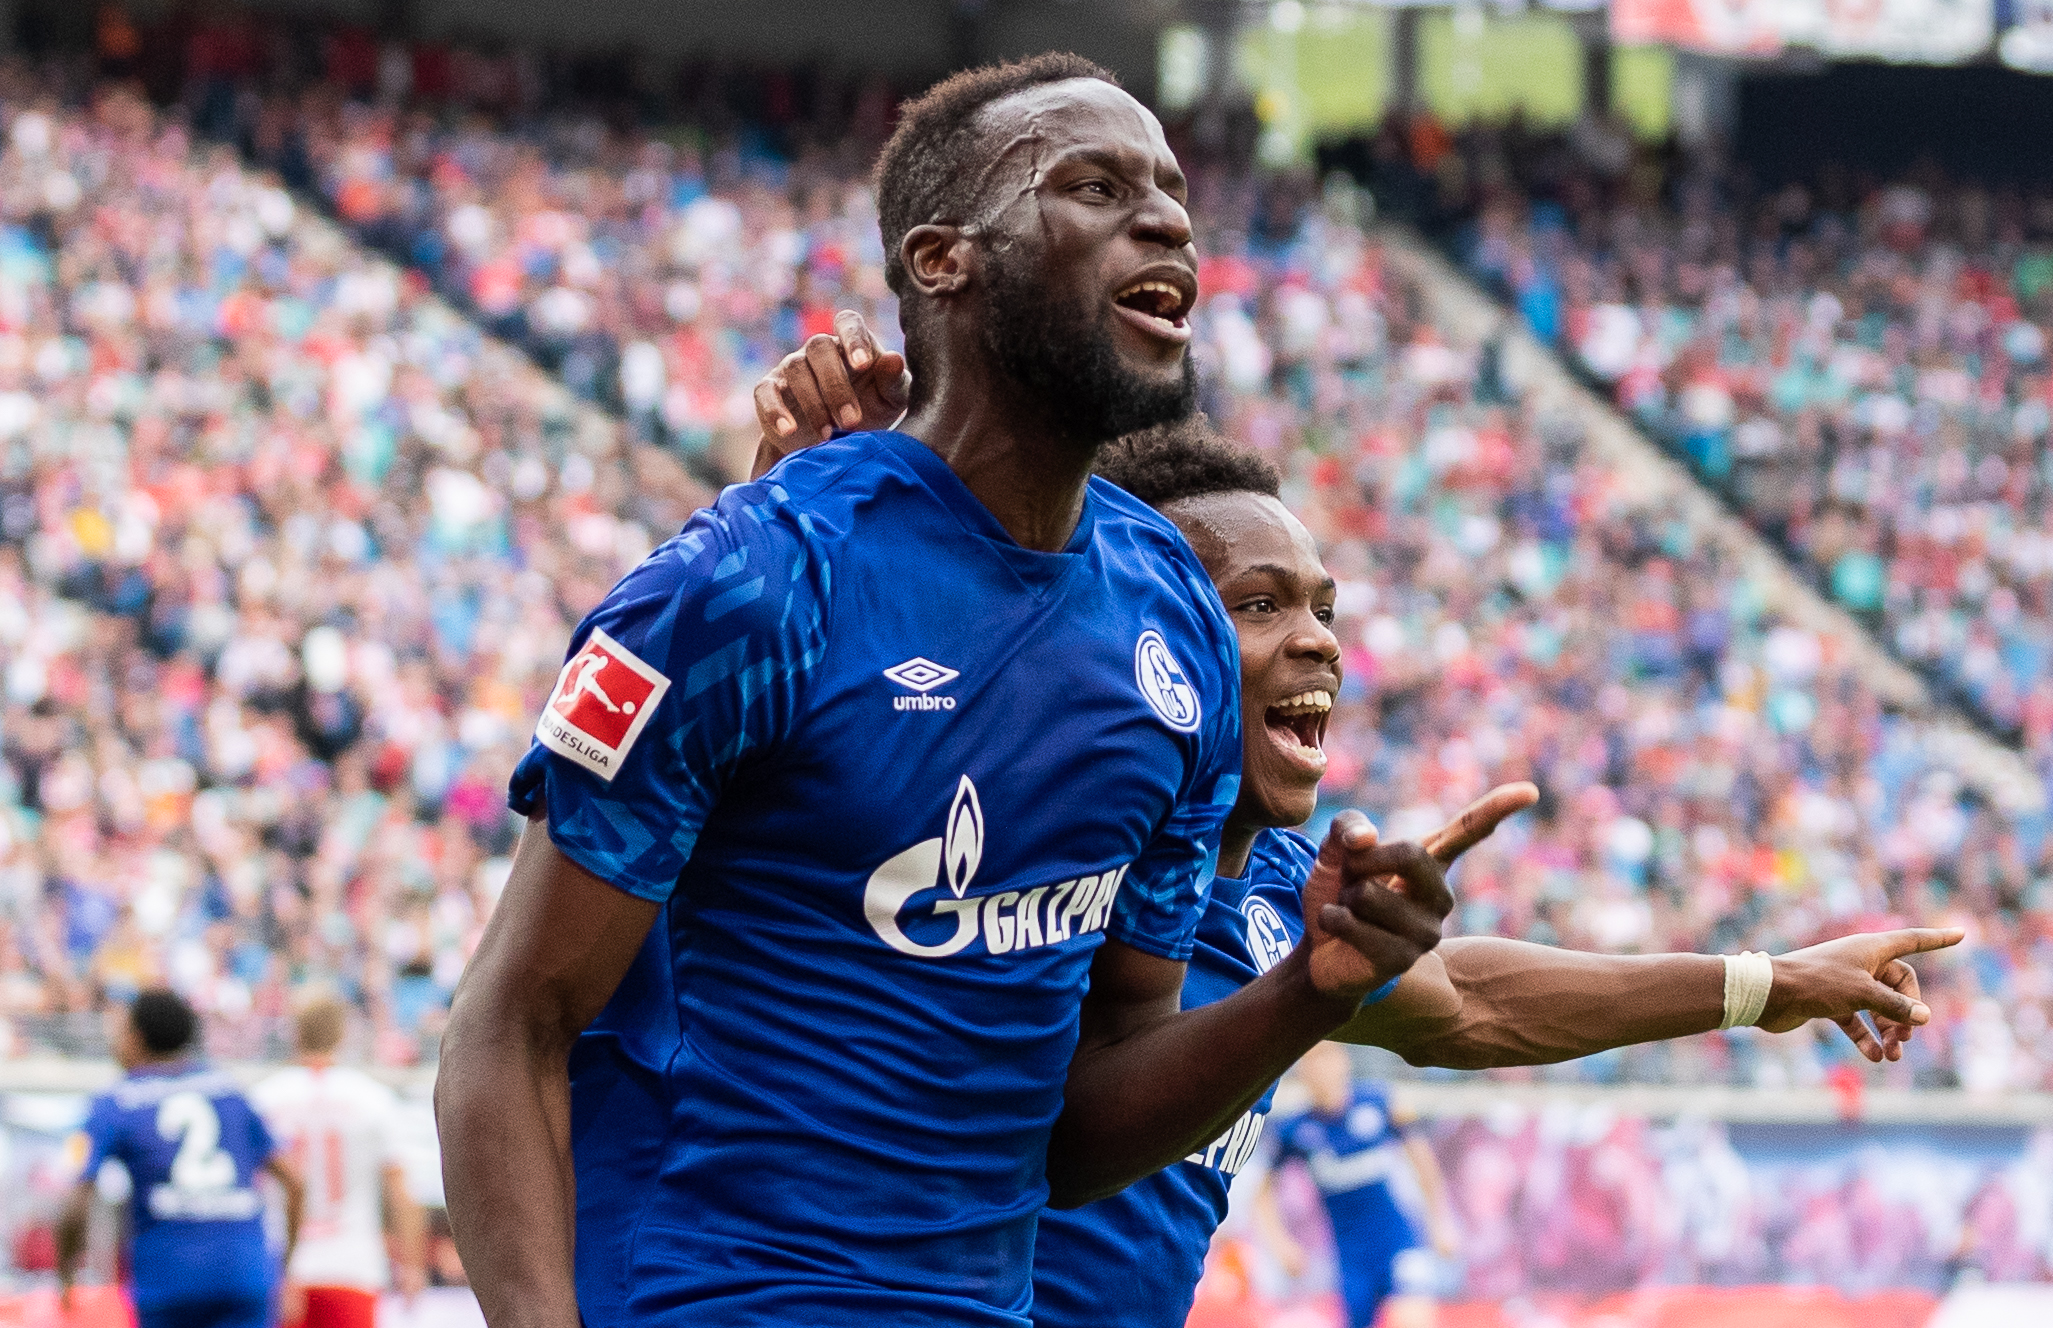 LEIPZIG, GERMANY - SEPTEMBER 28: Salif Sane of FC Schalke 04 celebrates with teammate Rabbi Matondo Baba of VfL Wolfsburg after scoring his team's first goal during the Bundesliga match between RB Leipzig and FC Schalke 04 at Red Bull Arena on September 28, 2019 in Leipzig, Germany. (Photo by Boris Streubel/Bongarts/Getty Images)